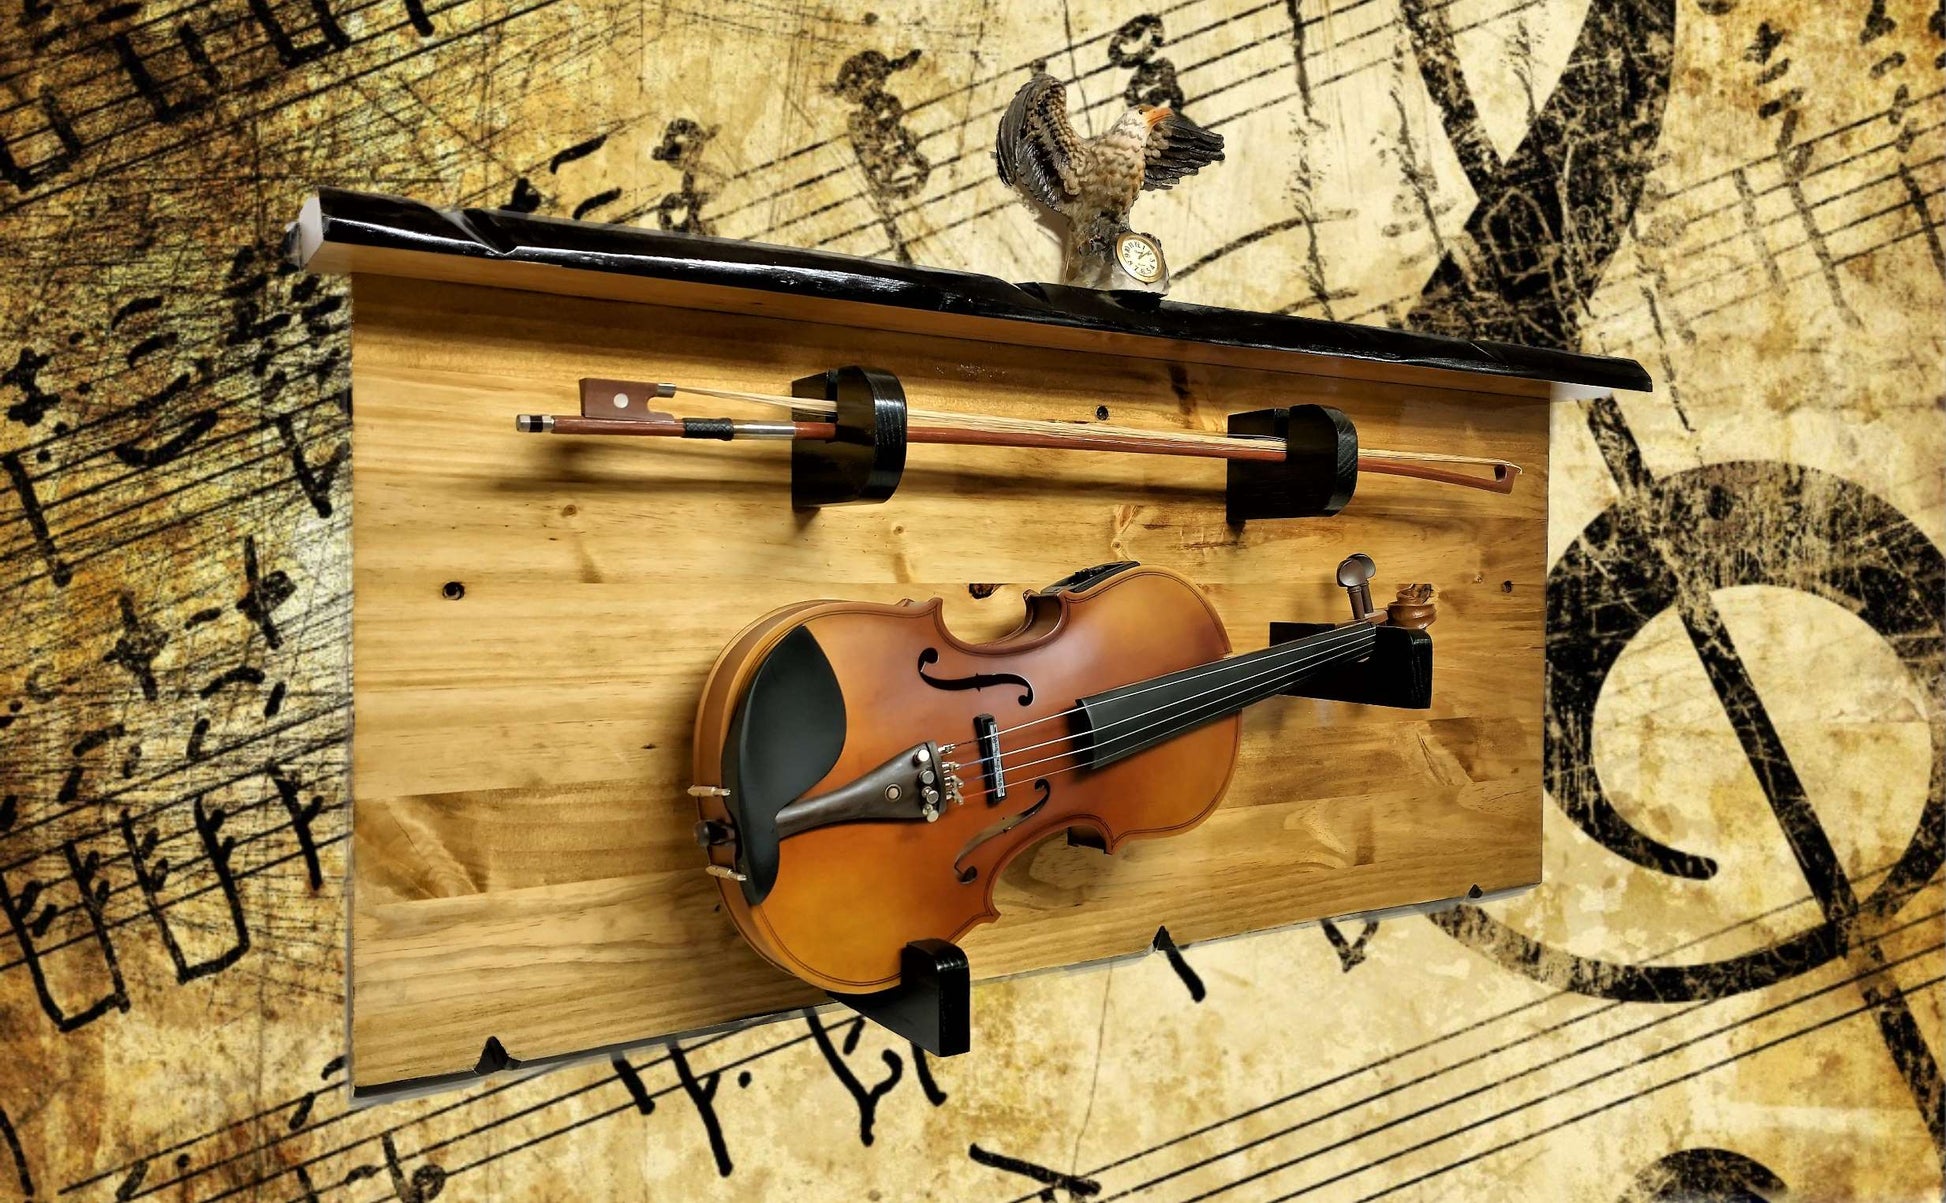 Walker Wood Gifts guitar rack RUSTIC VIOLIN FIDDLE Wall Display With Shelf, Knotty Pine Black Hangers Wall Hanging Decor